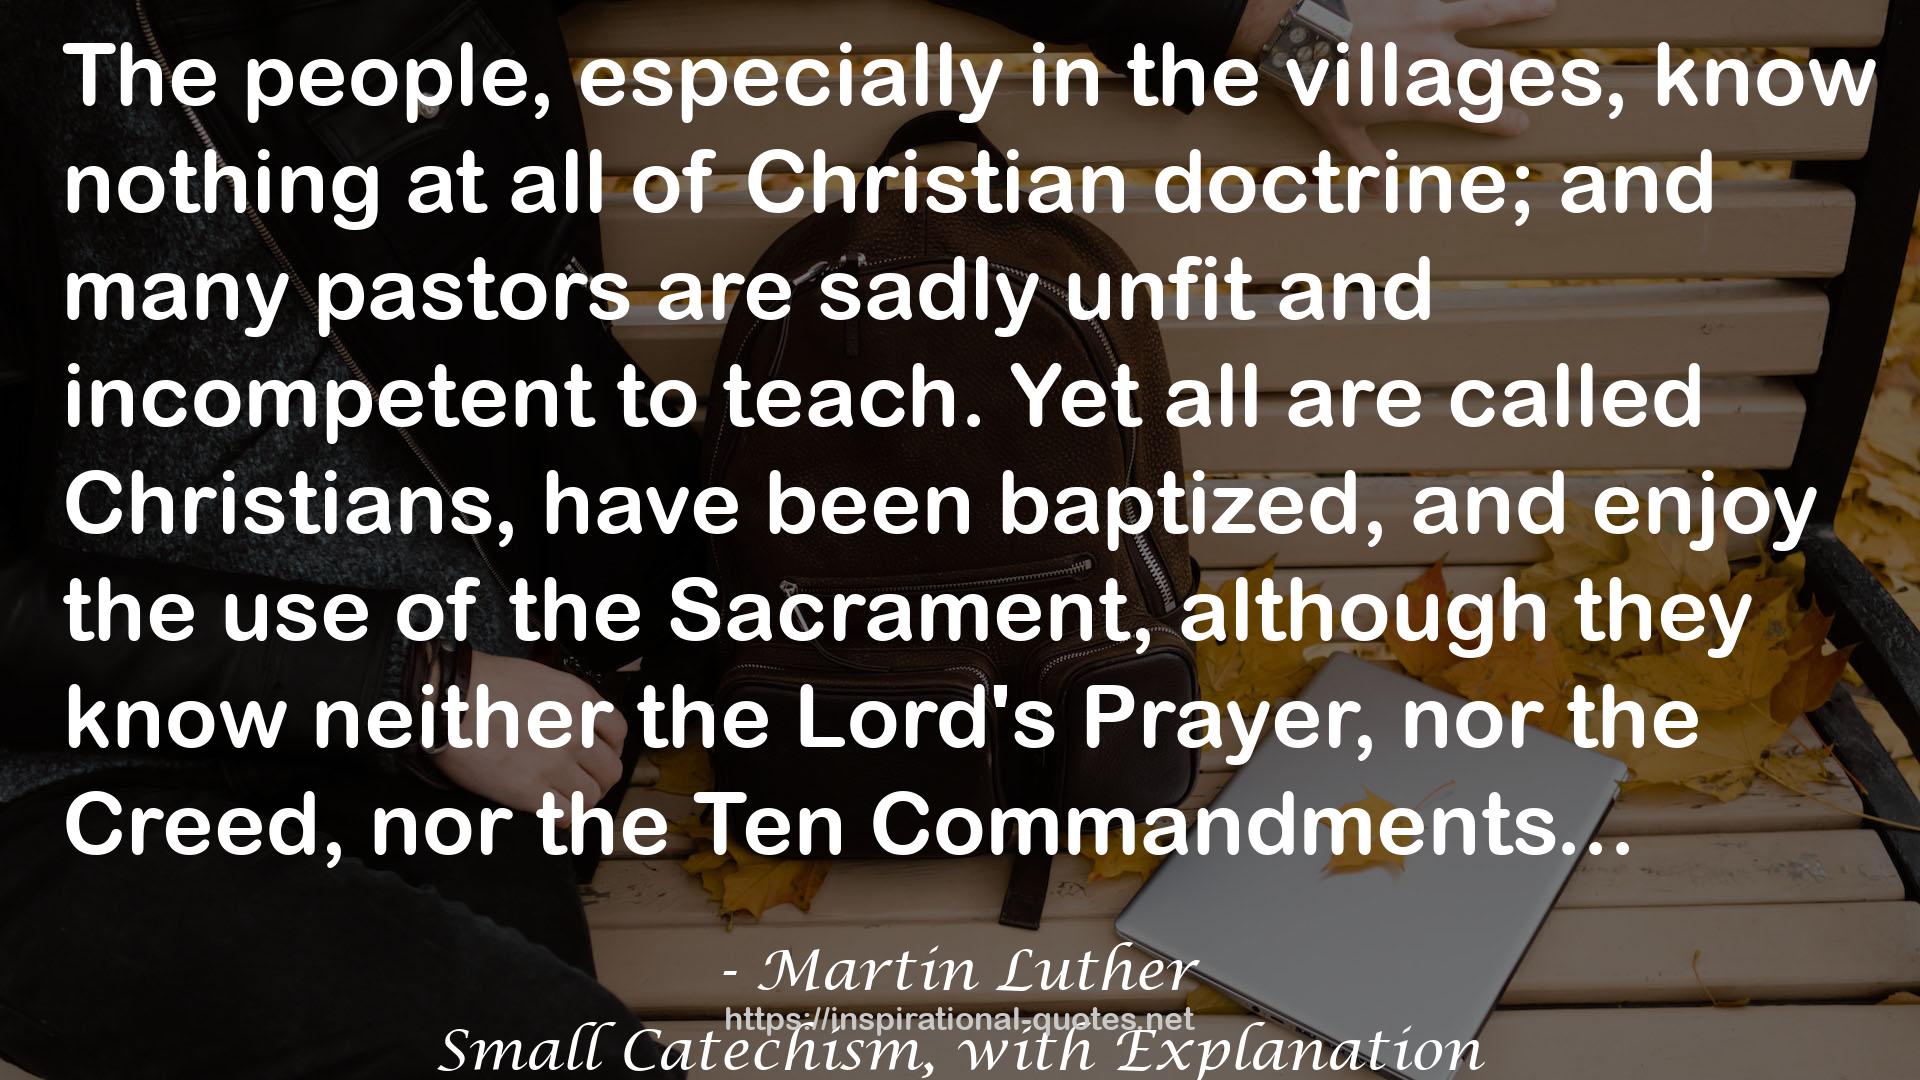 Small Catechism, with Explanation QUOTES